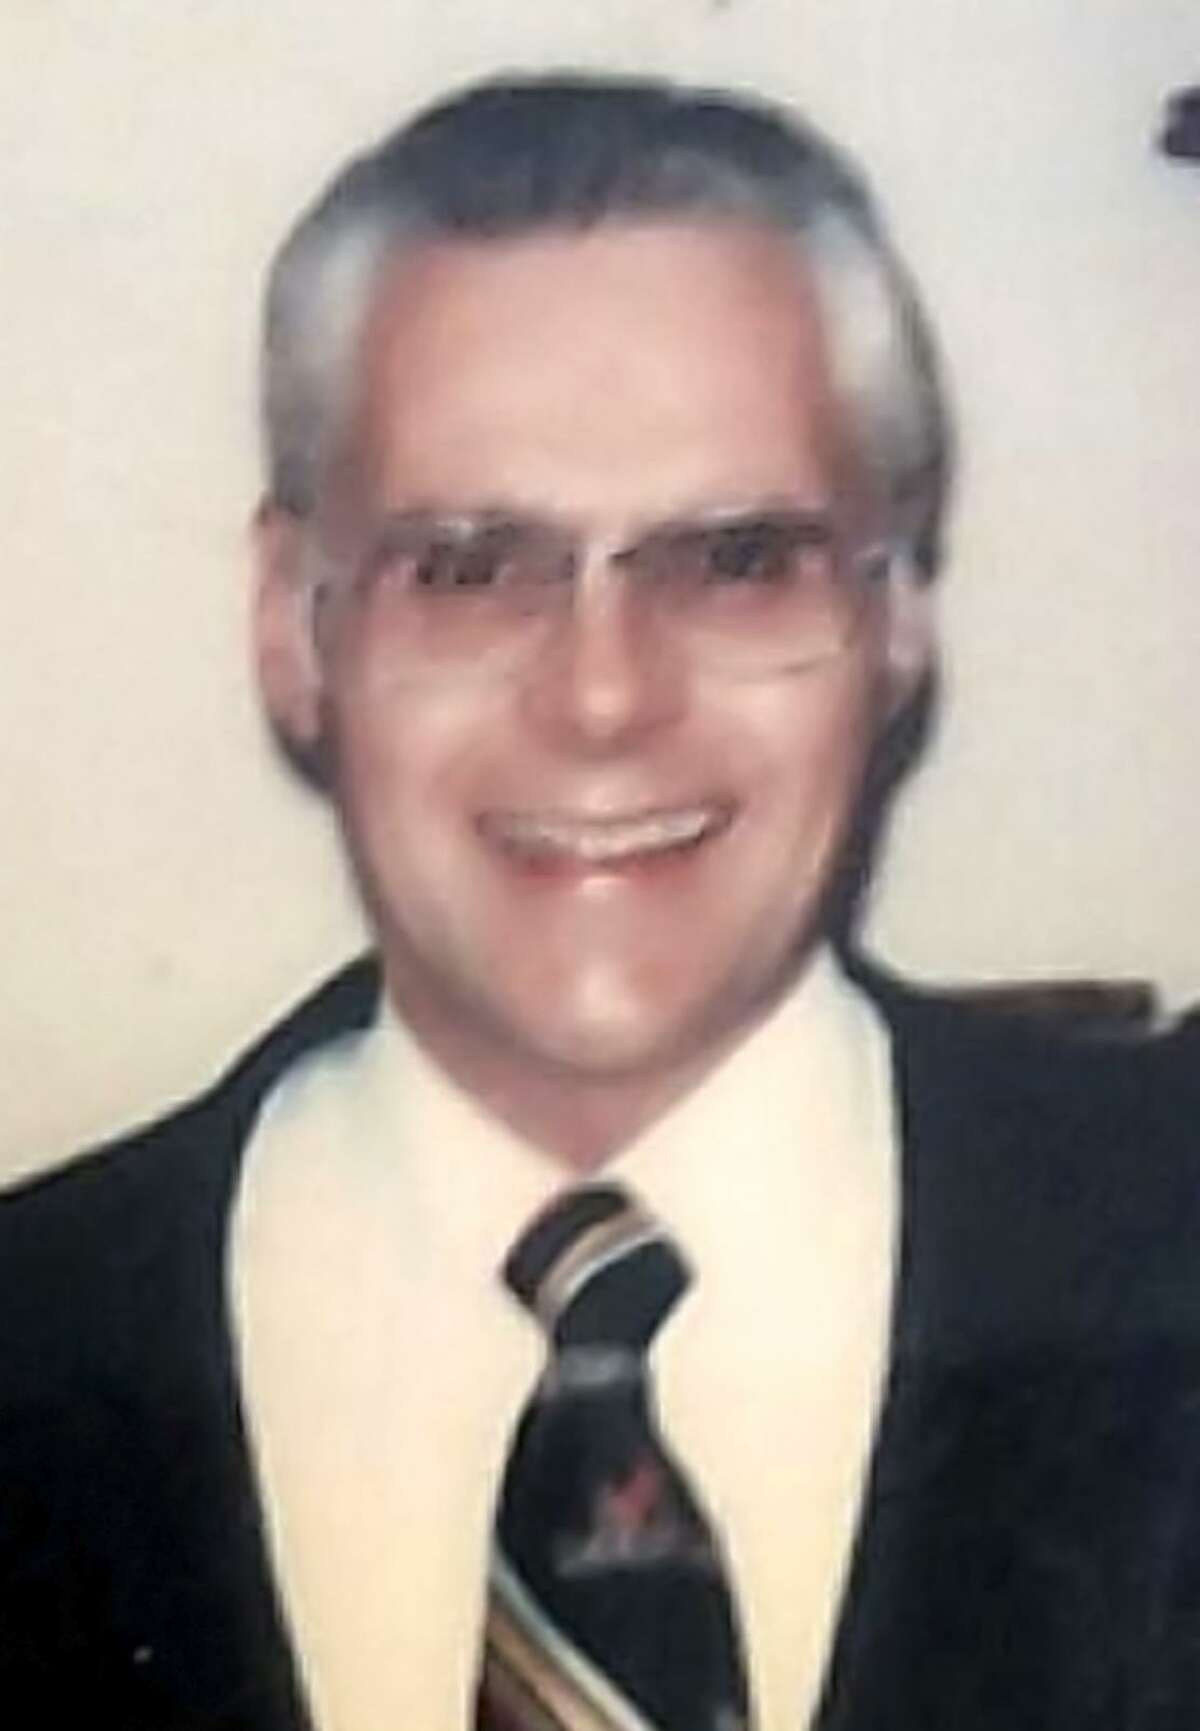 William C. “Bill” Thomas served as publisher of the San Antonio Light in the 1980s.